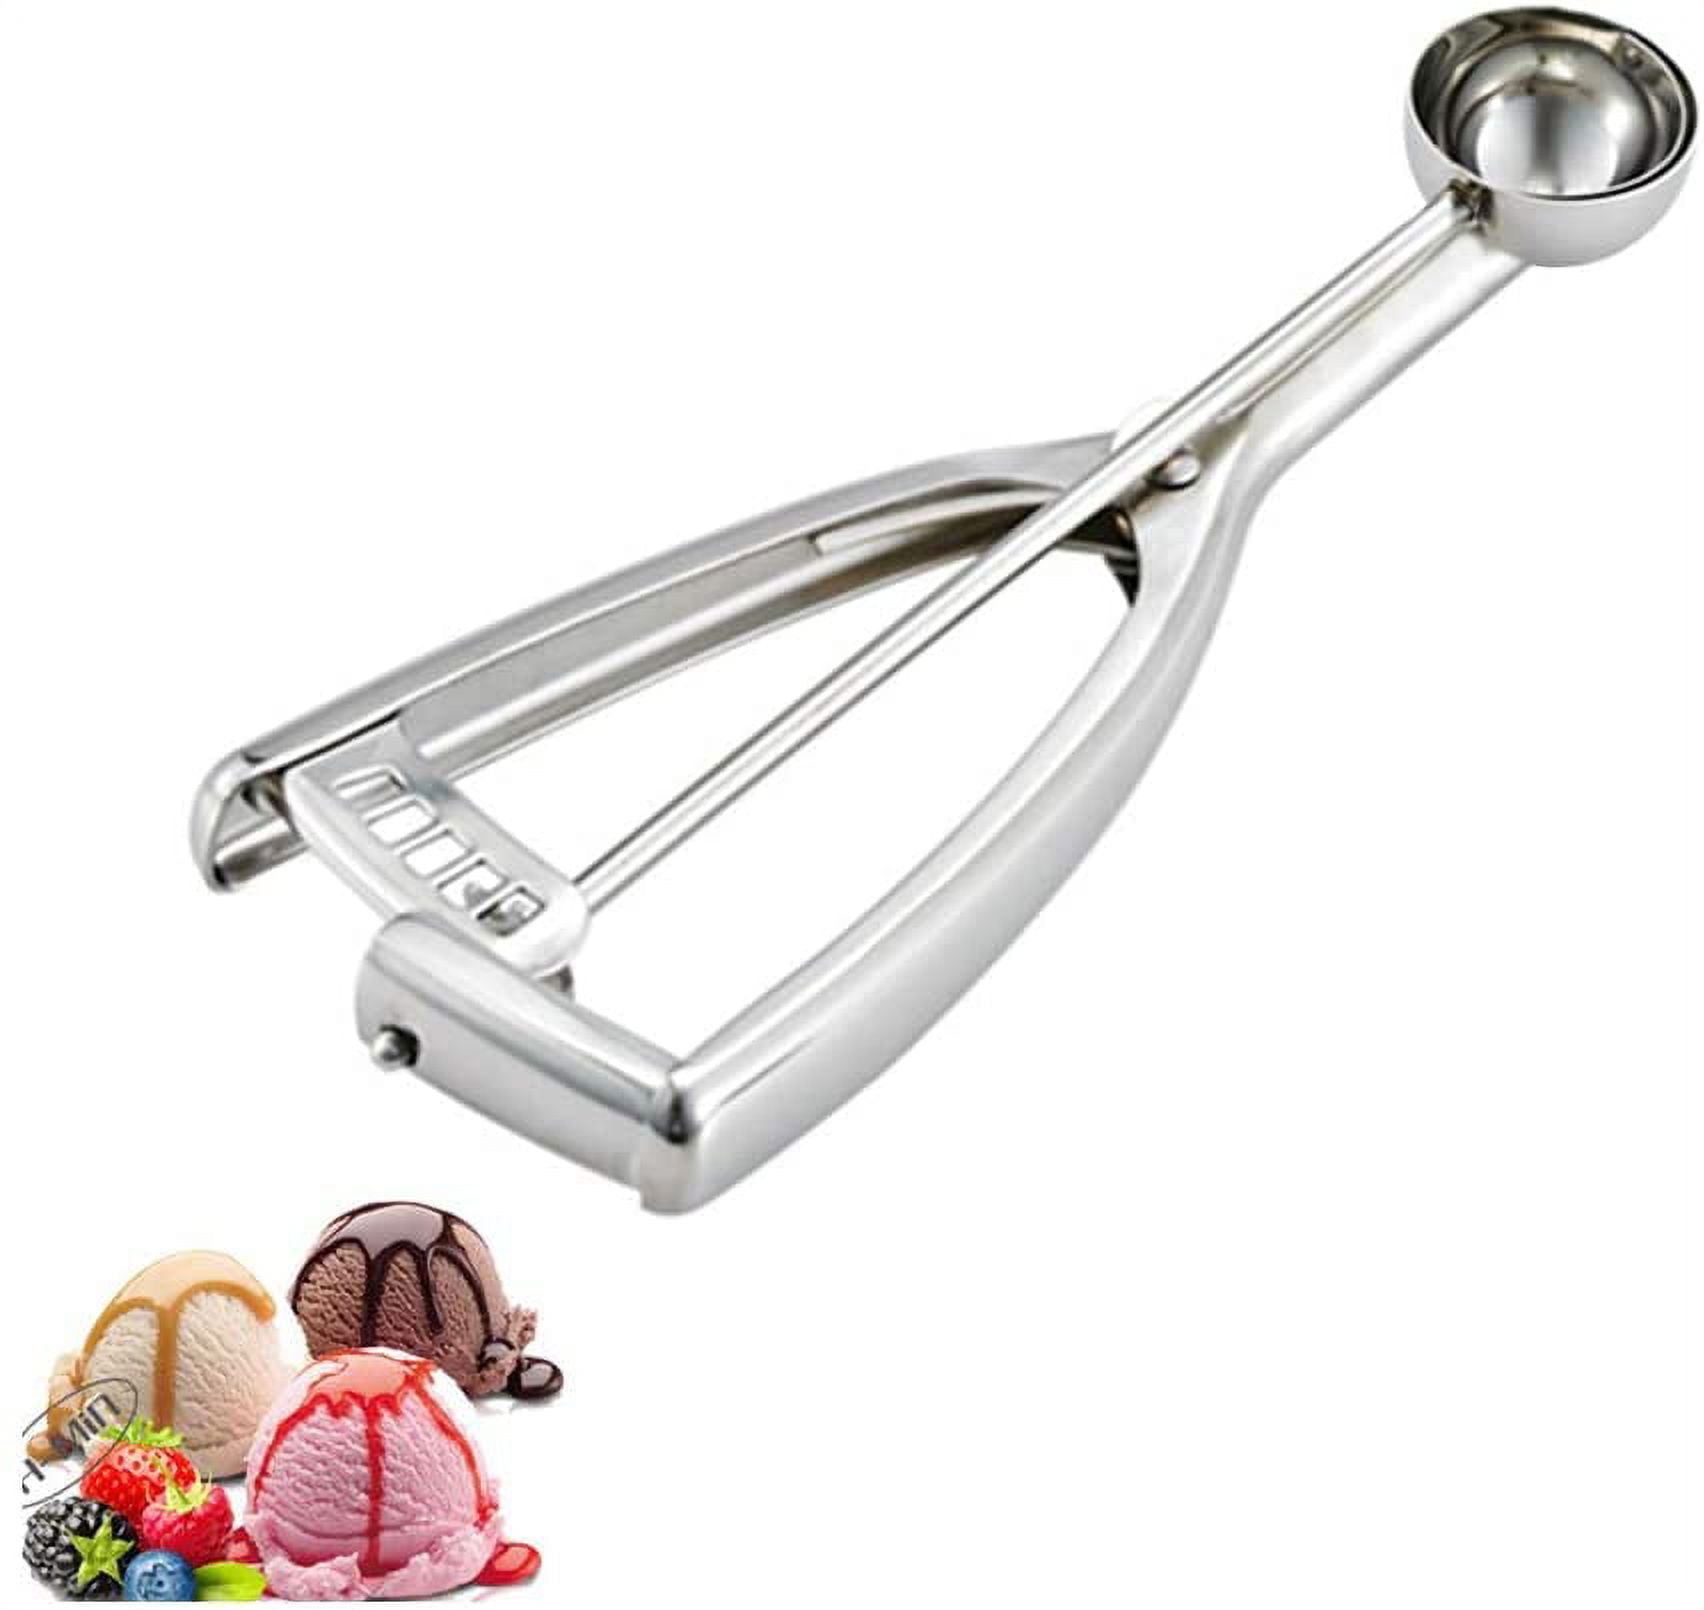 Fayomir Small Cookie Scoop - Small Ice Cream Scoop - 1 Tablespoon/ 3  Teaspoon/ 15ml - Selected 18/8 Stainless Steel Dough